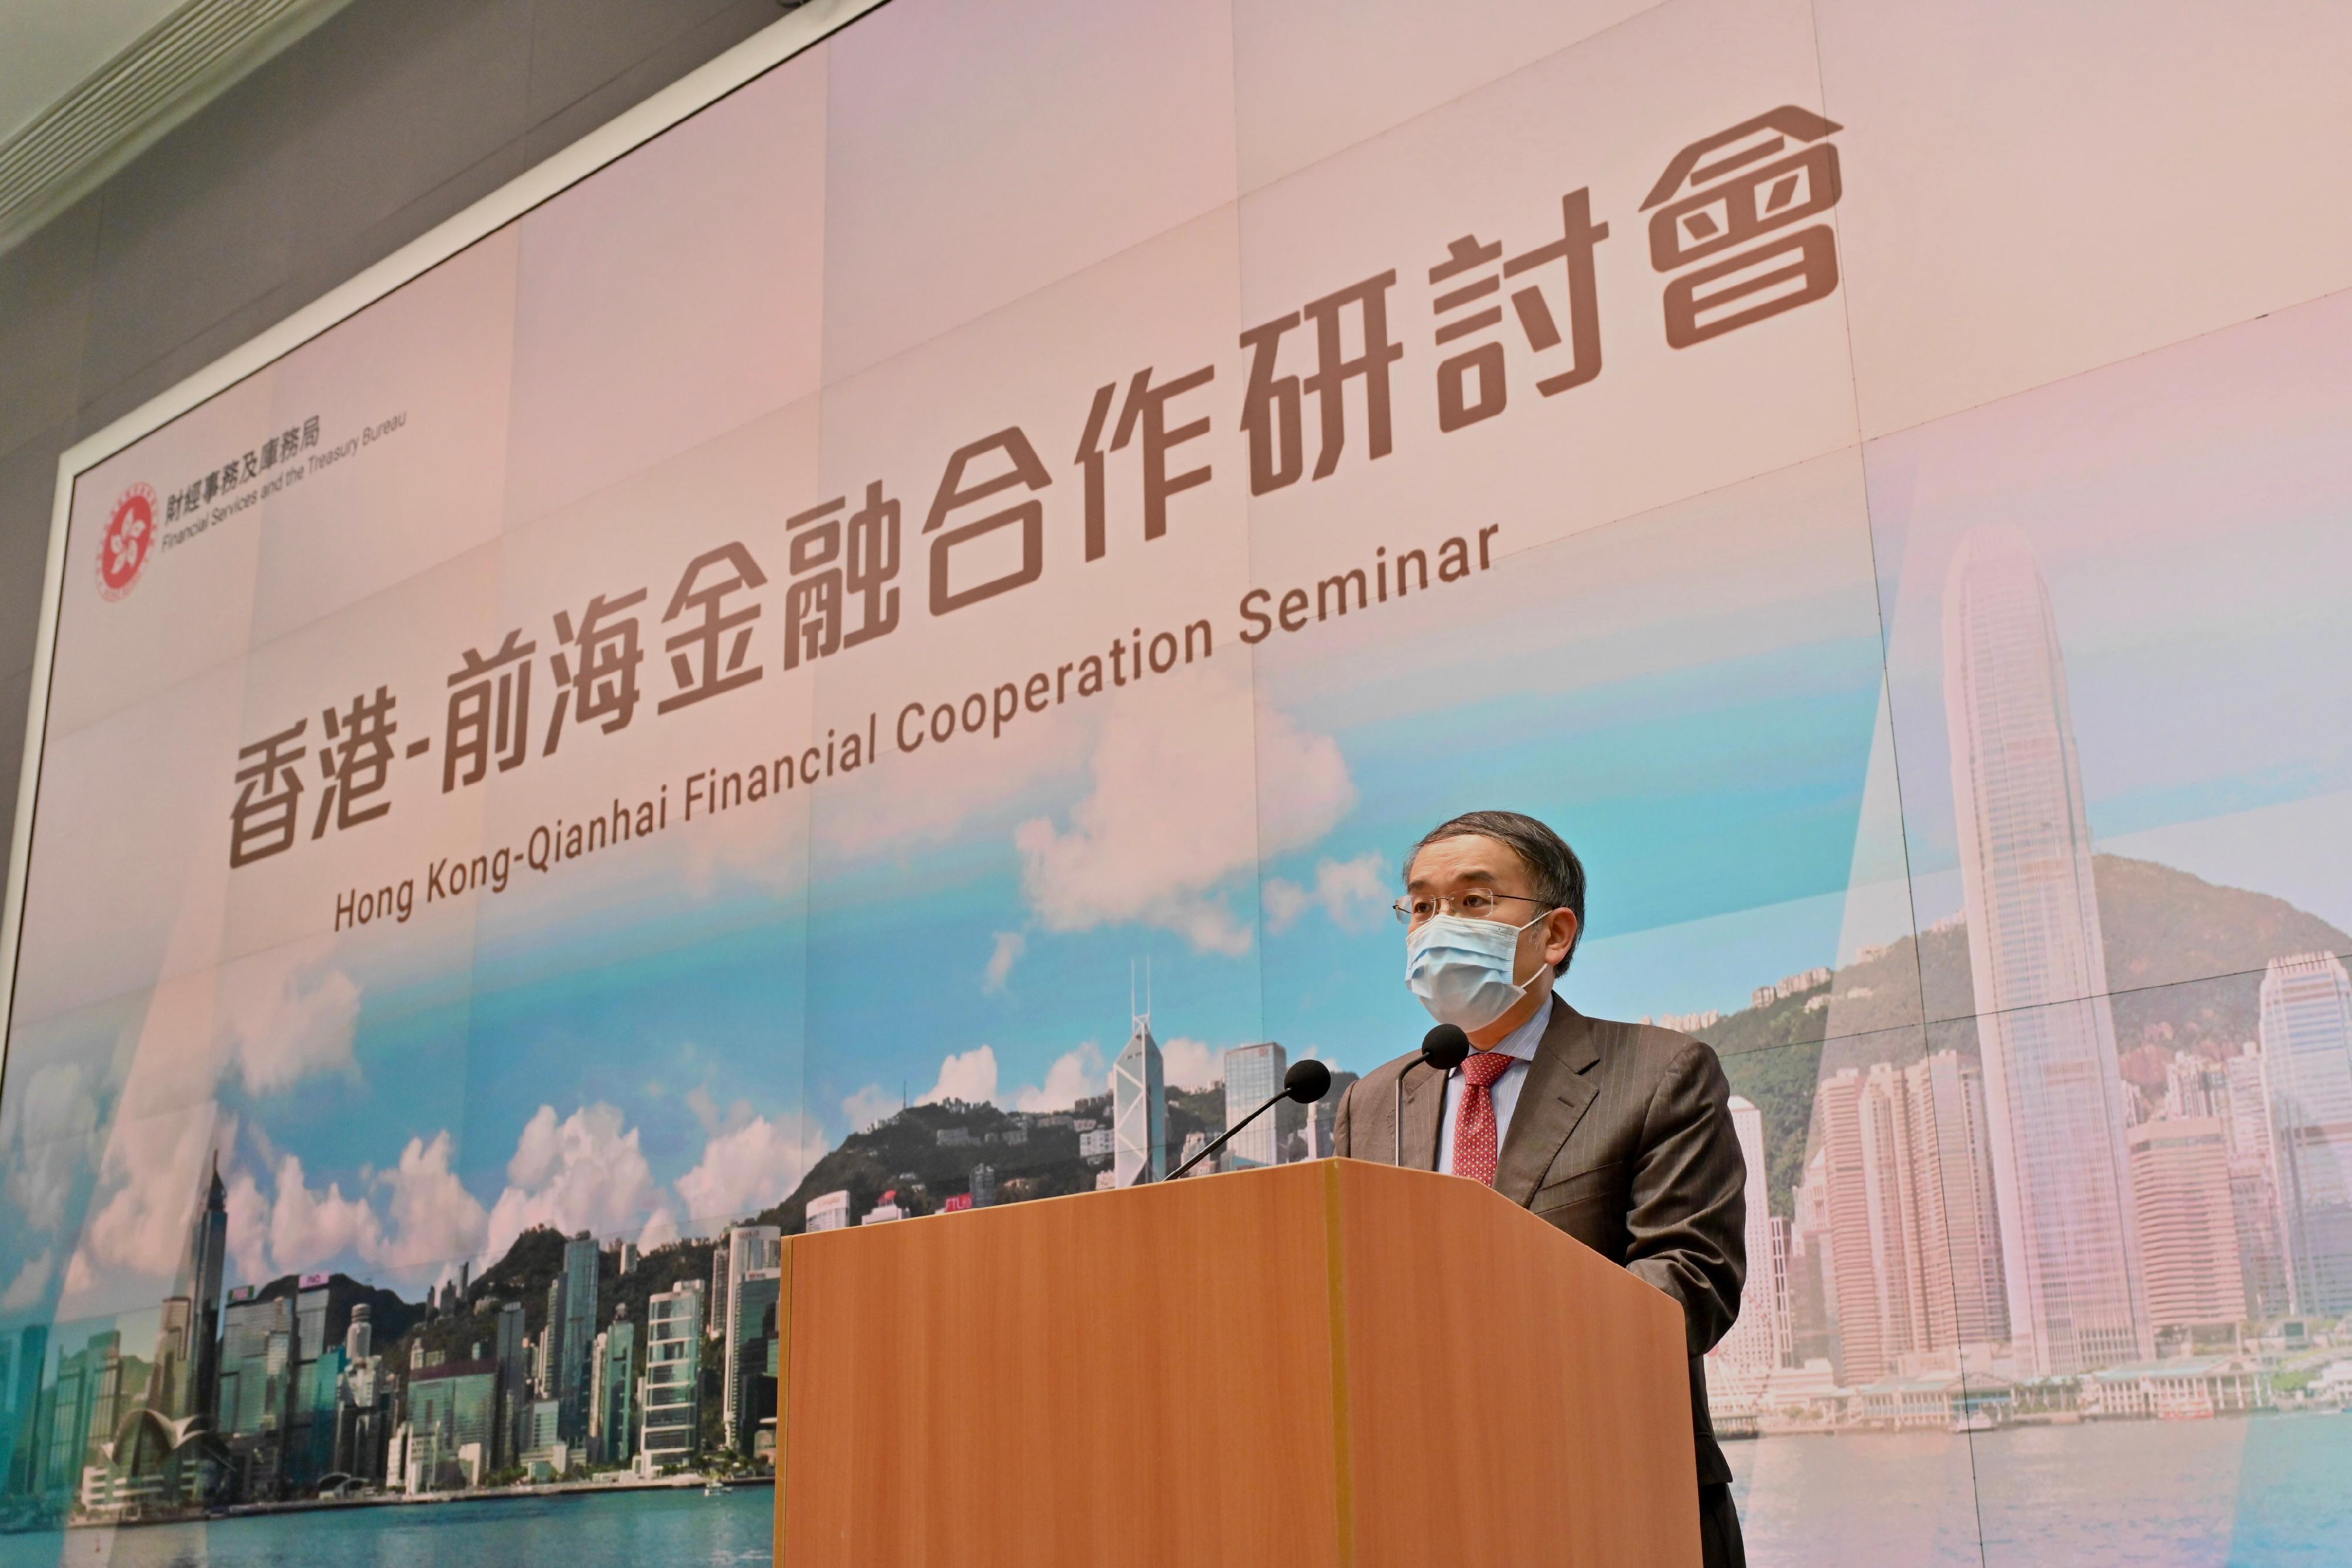 The Secretary for Financial Services and the Treasury, Mr Christopher Hui, today (December 15) delivers a speech at the Hong Kong-Qianhai Financial Cooperation Seminar jointly held by the Financial Services and the Treasury Bureau and the Qianhai Authority. 